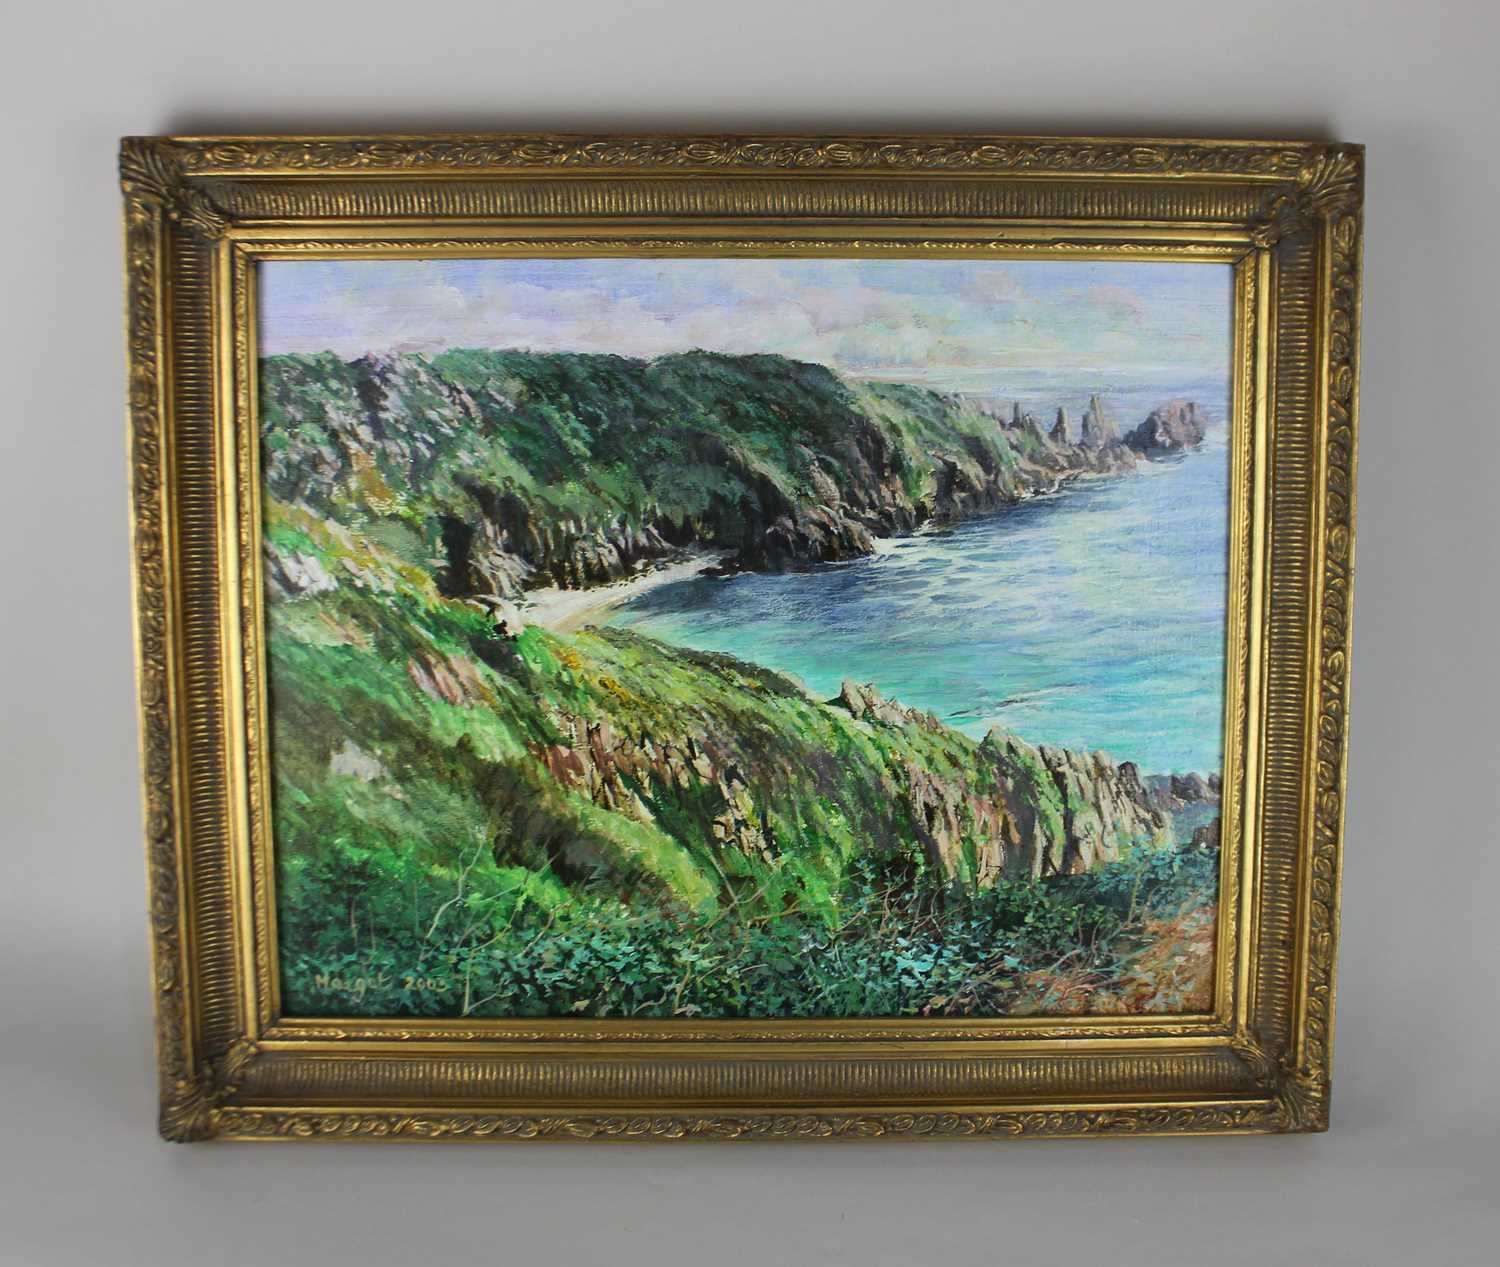 Margot Smith, coastal Guernsey landscape, 'Overlooking Pea Stacks', oil on canvas, signed and